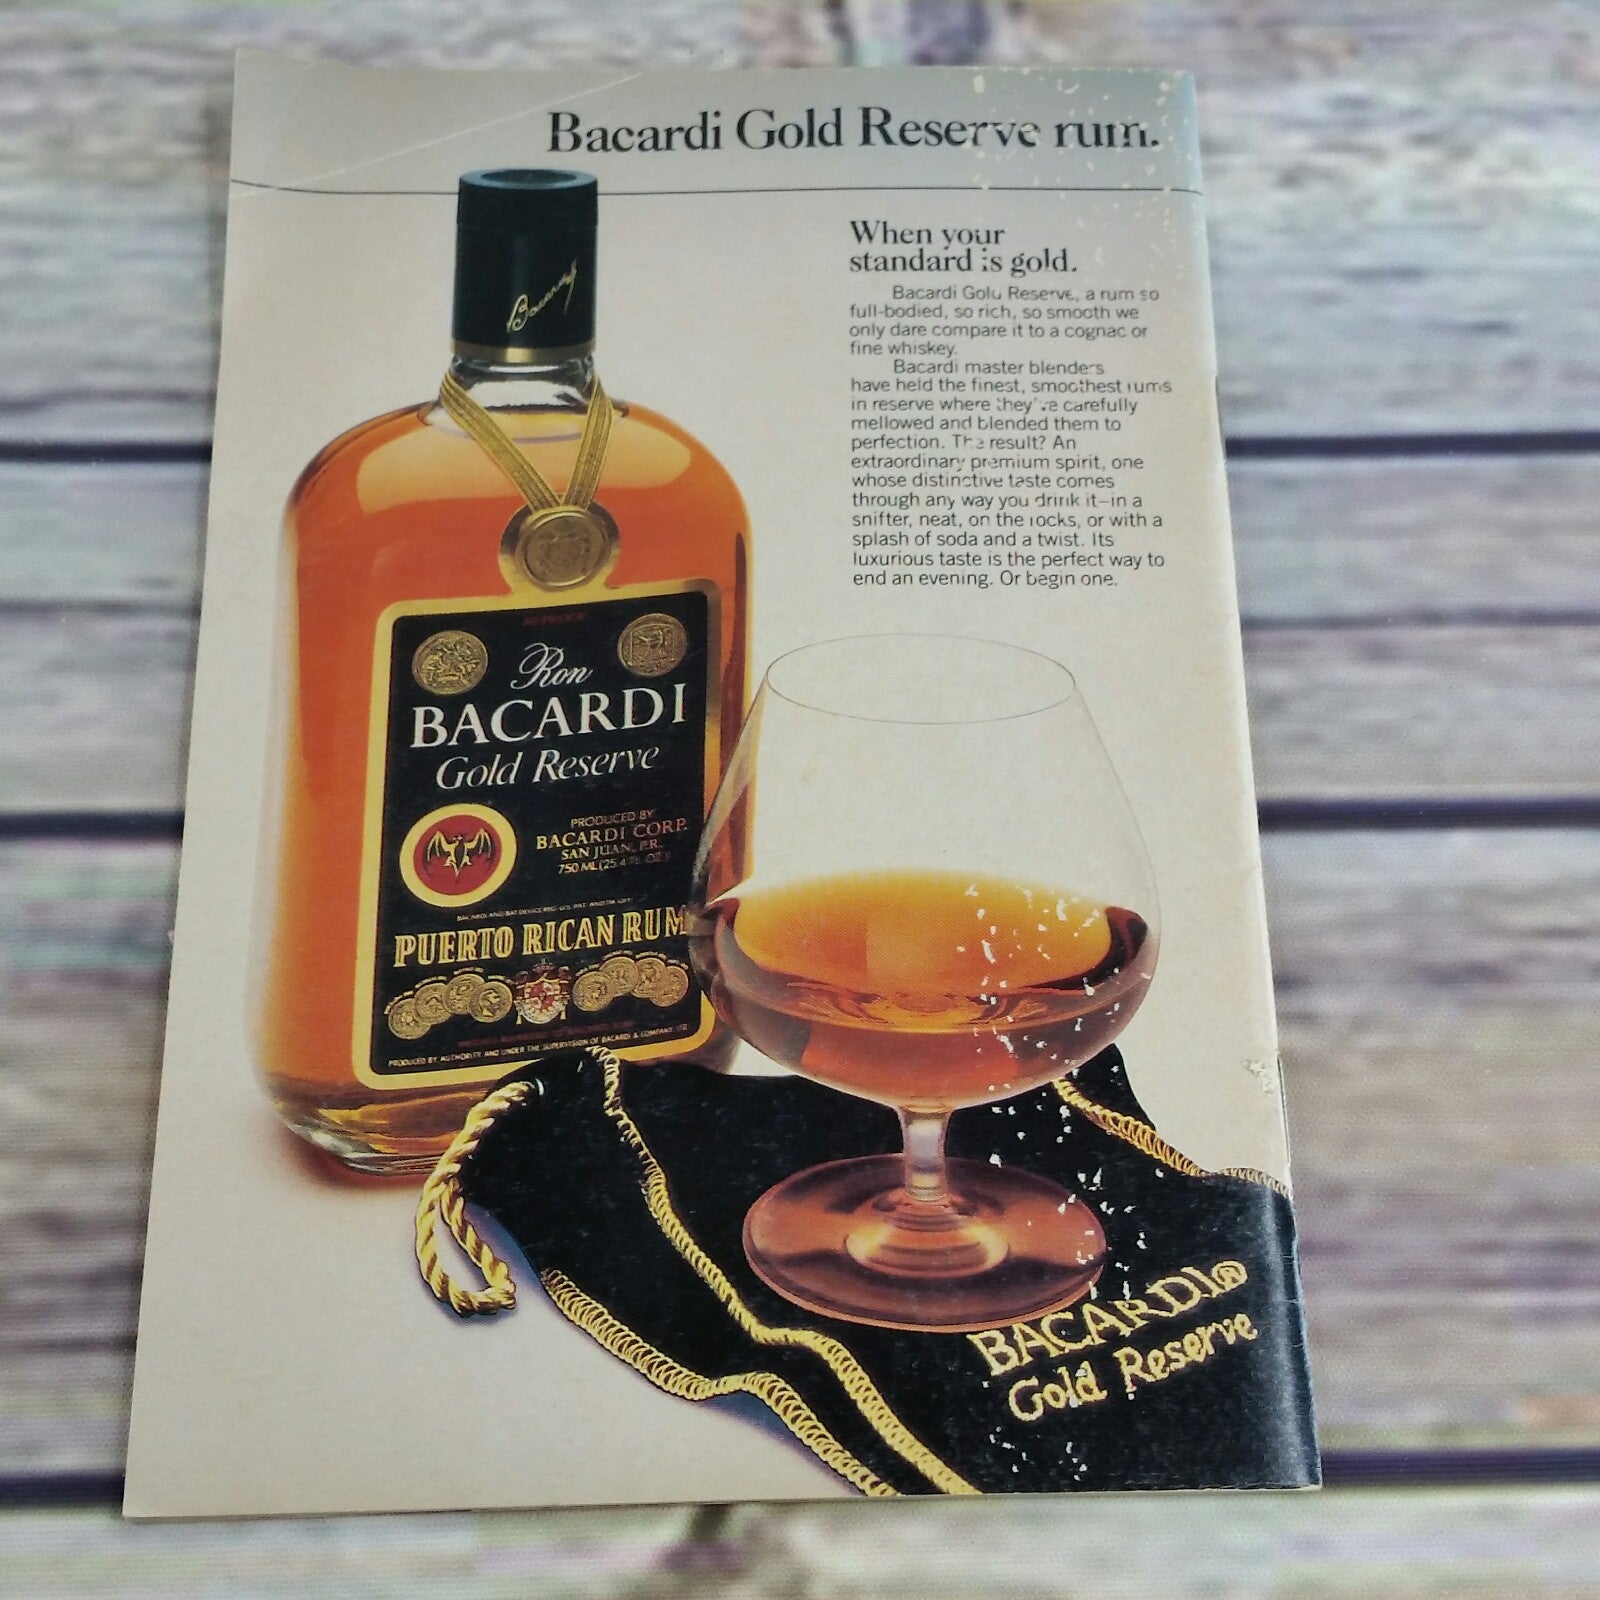 Vintage Cookbook Bacardi Rum Recipes Book Promo Paperback Booklet 1987 Come to Bacardi for the Season's Most Delicious Parties - At Grandma's Table